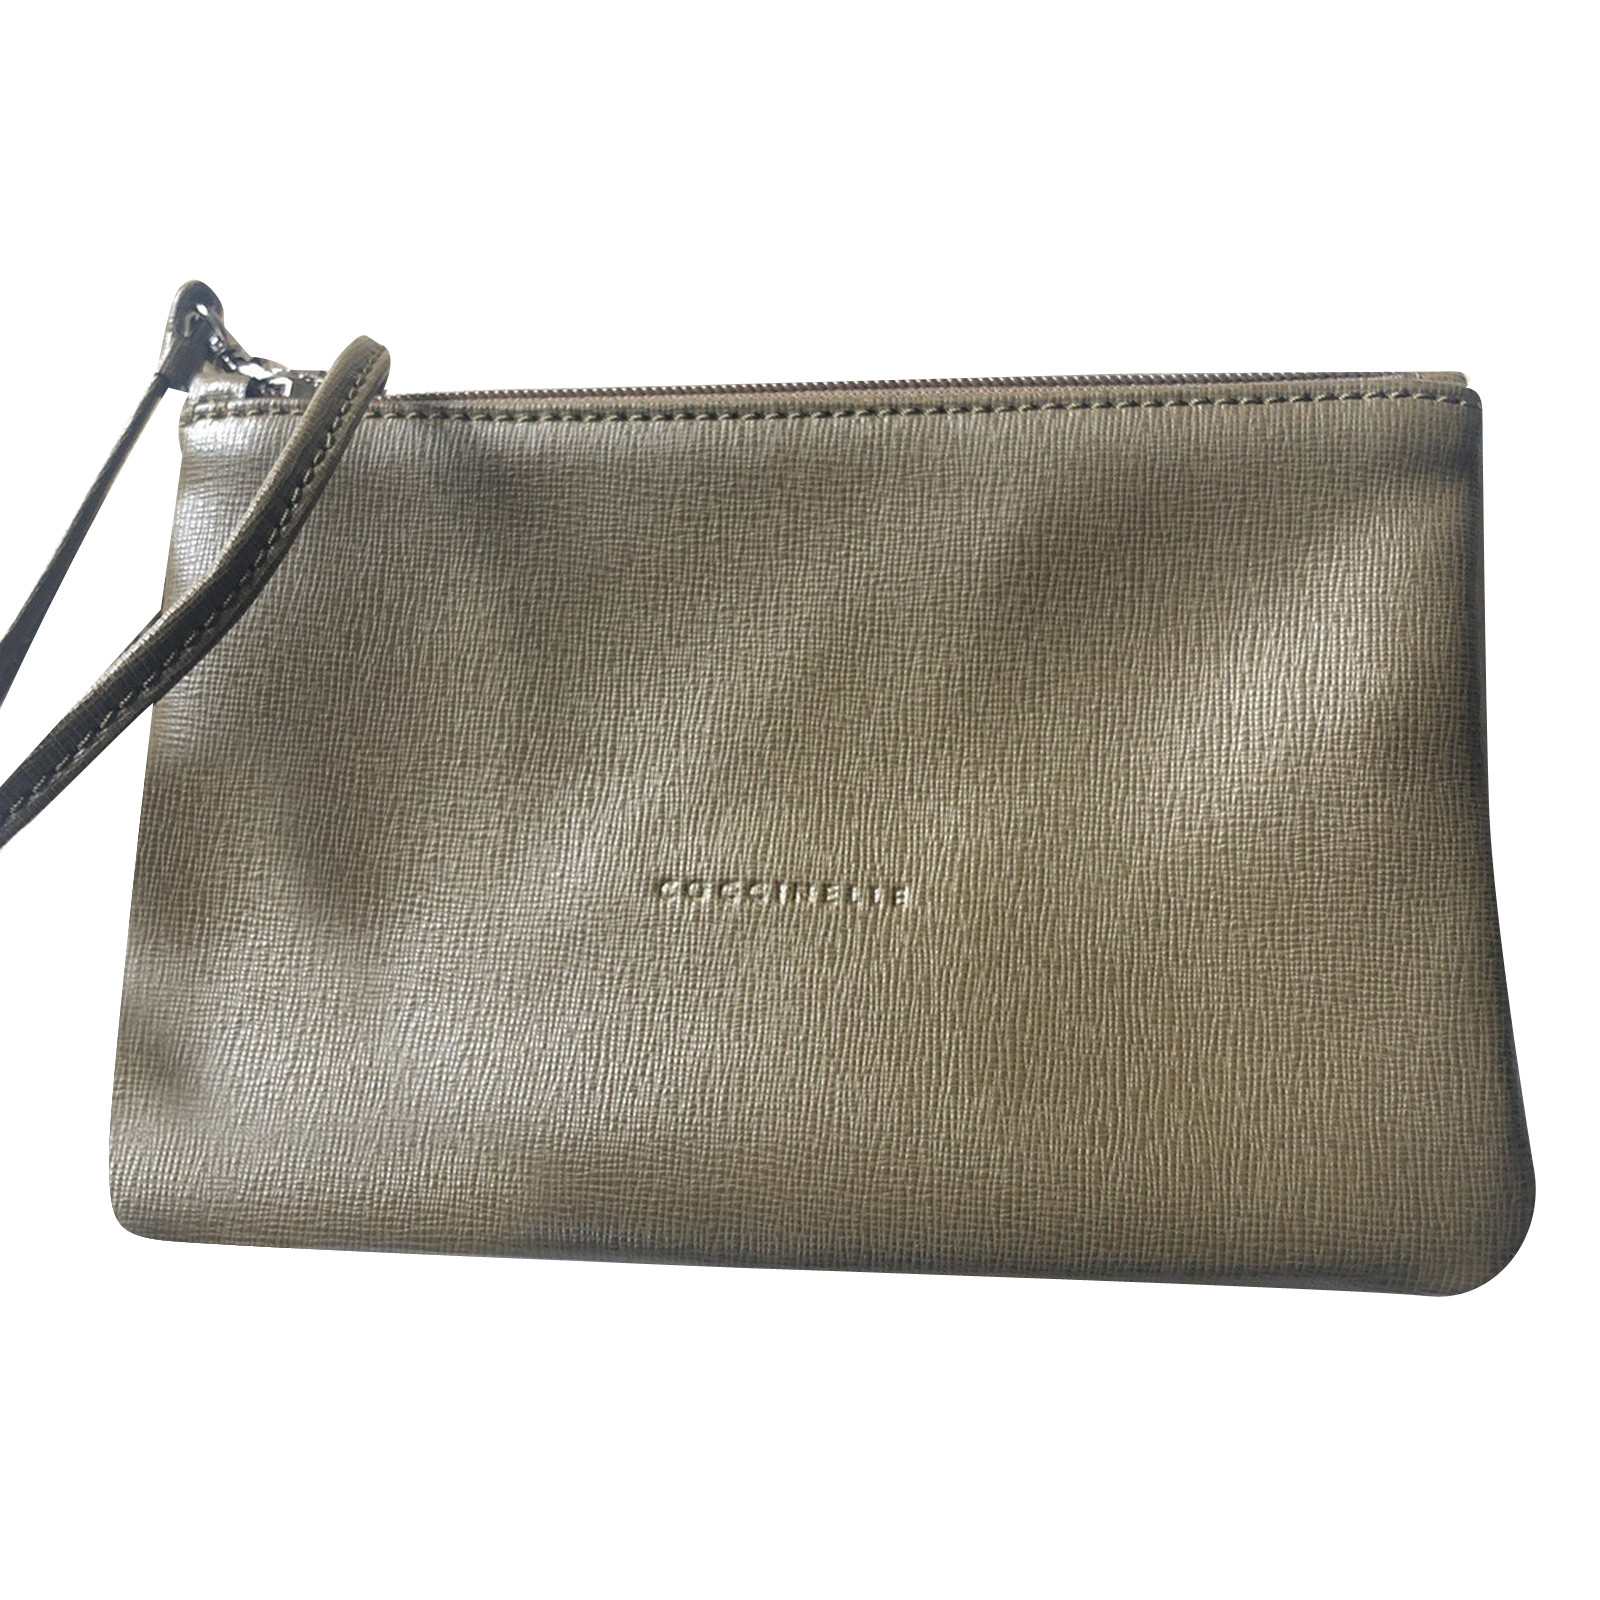 COCCINELLE Women's Clutch Bag Leather in Beige | Second Hand